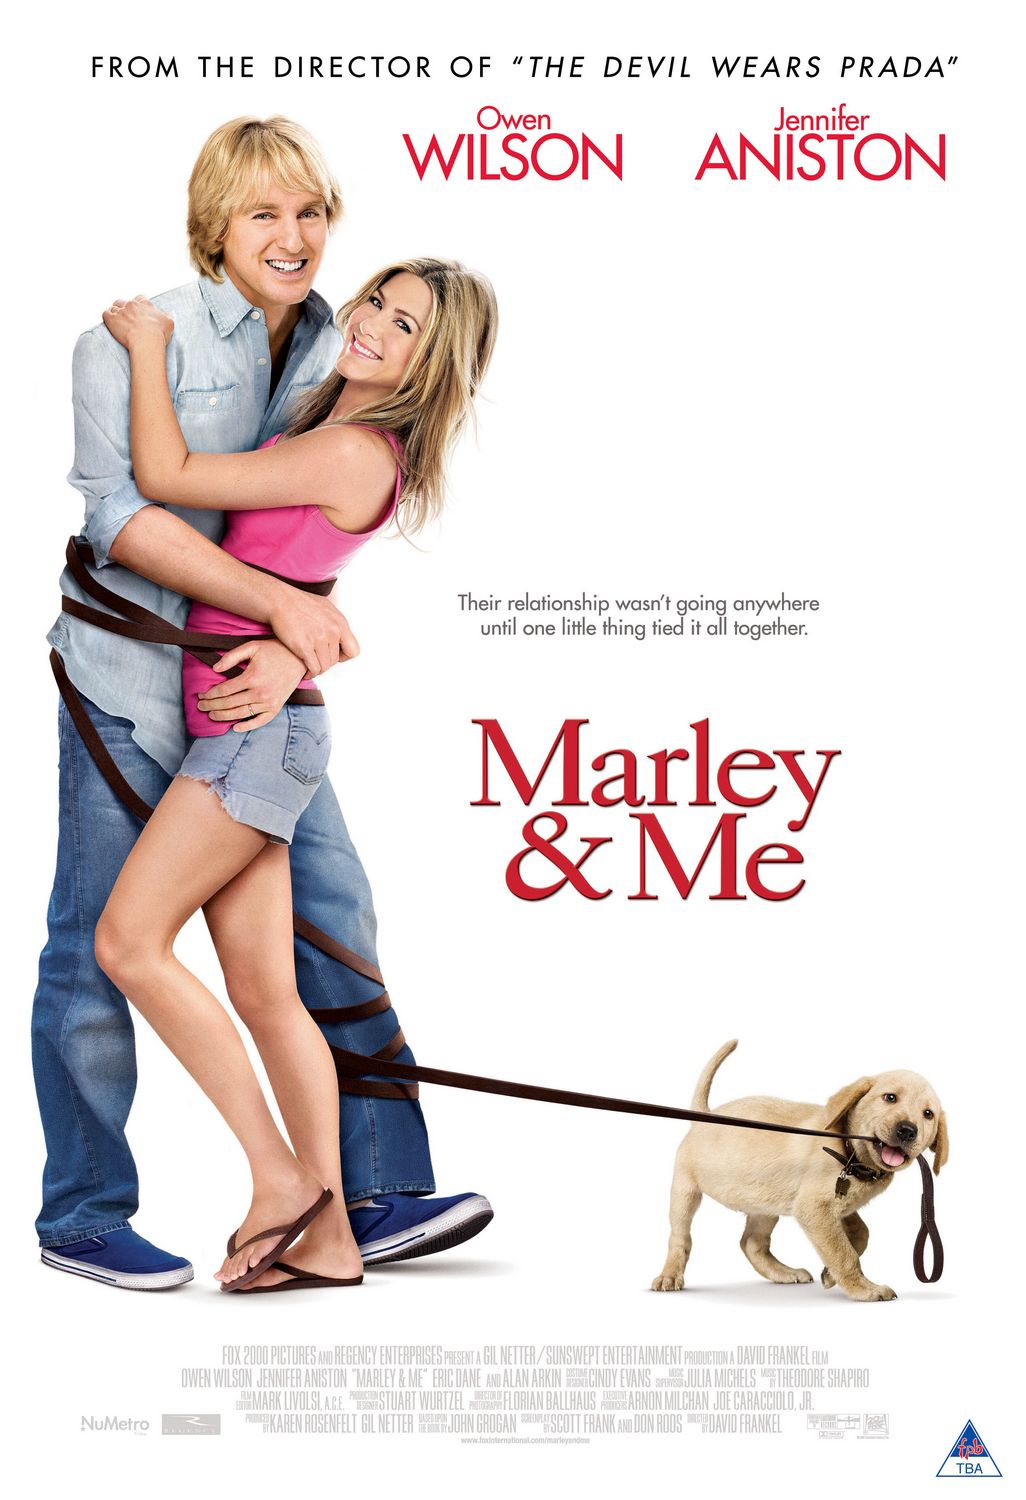 http://www.impawards.com/2008/posters/marley_and_me_ver5_xlg.jpg